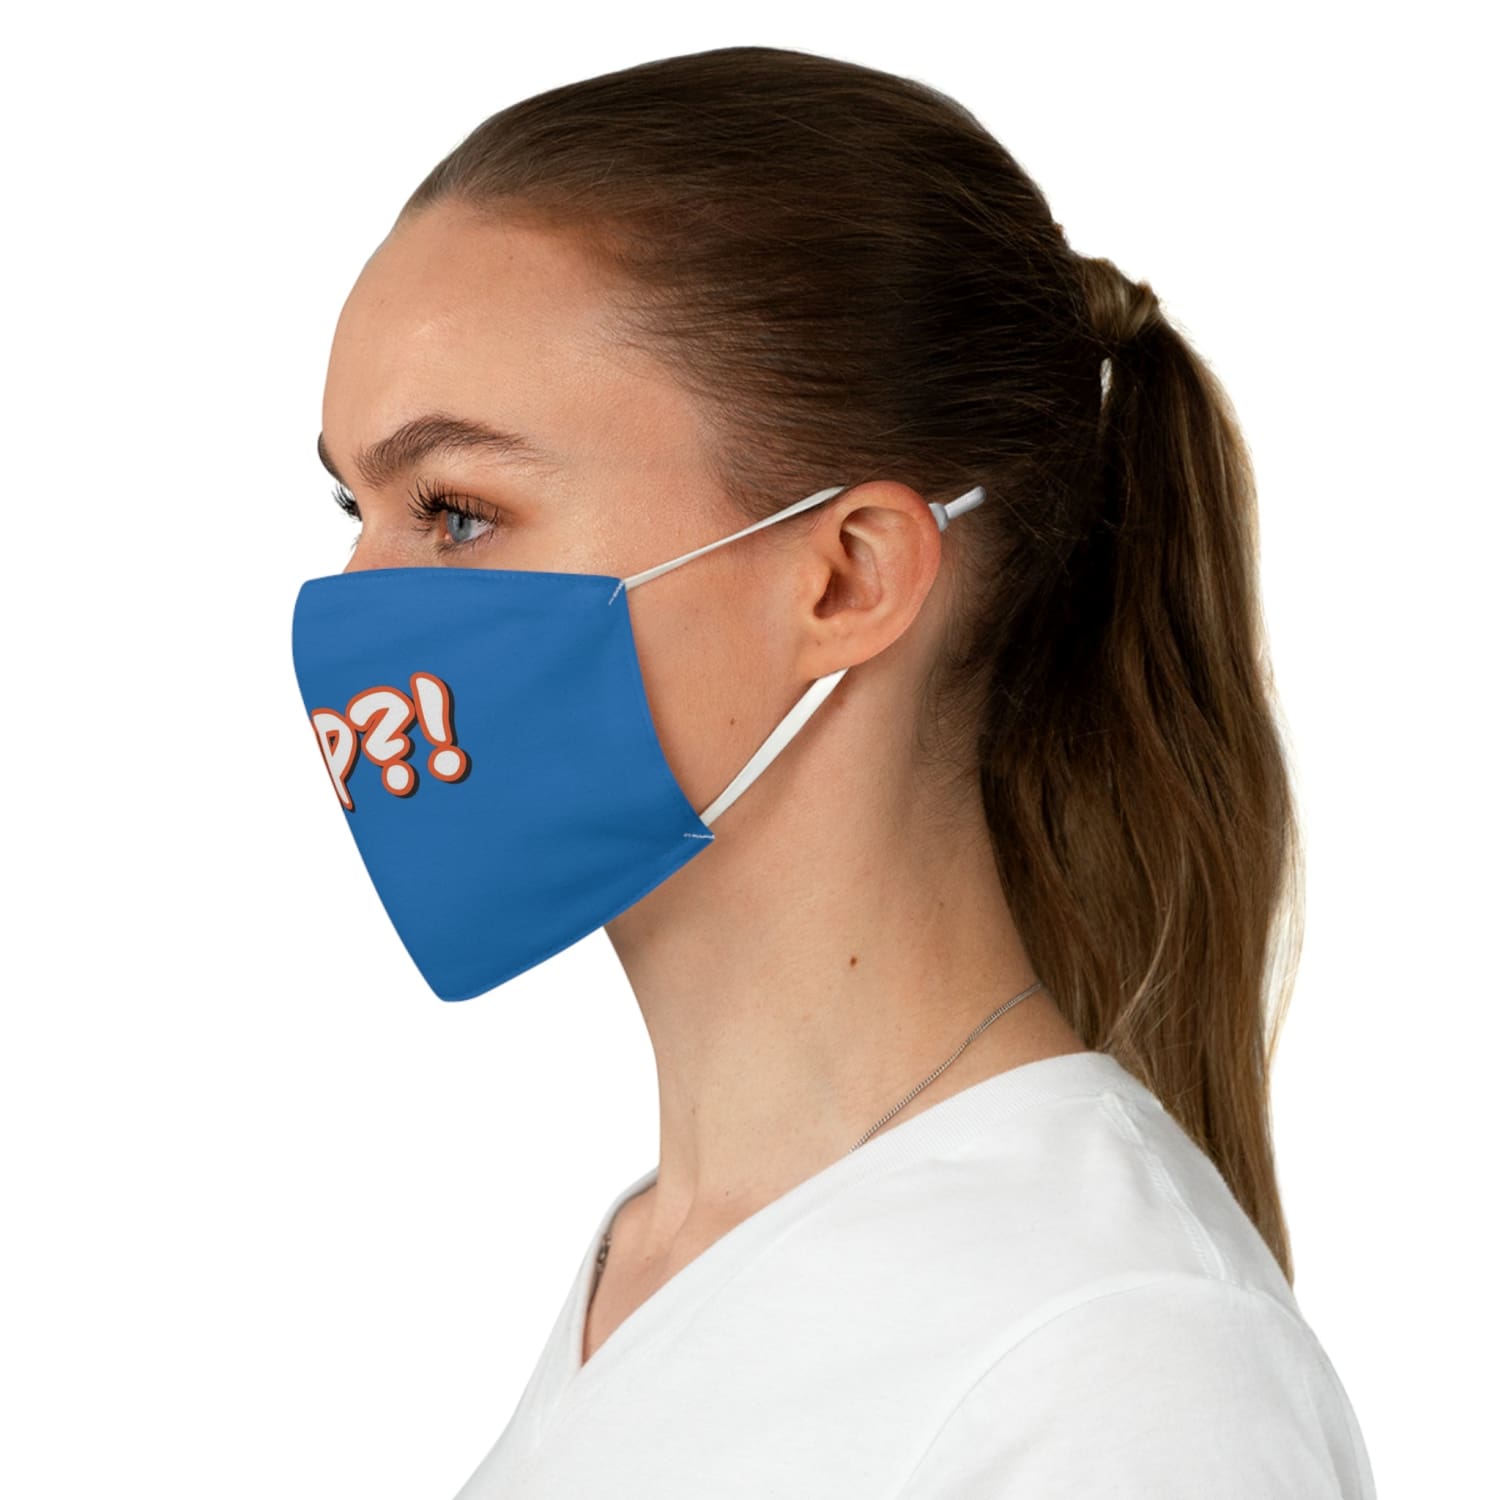 Blue Sup?! Fabric Face Mask - One size - Accessories